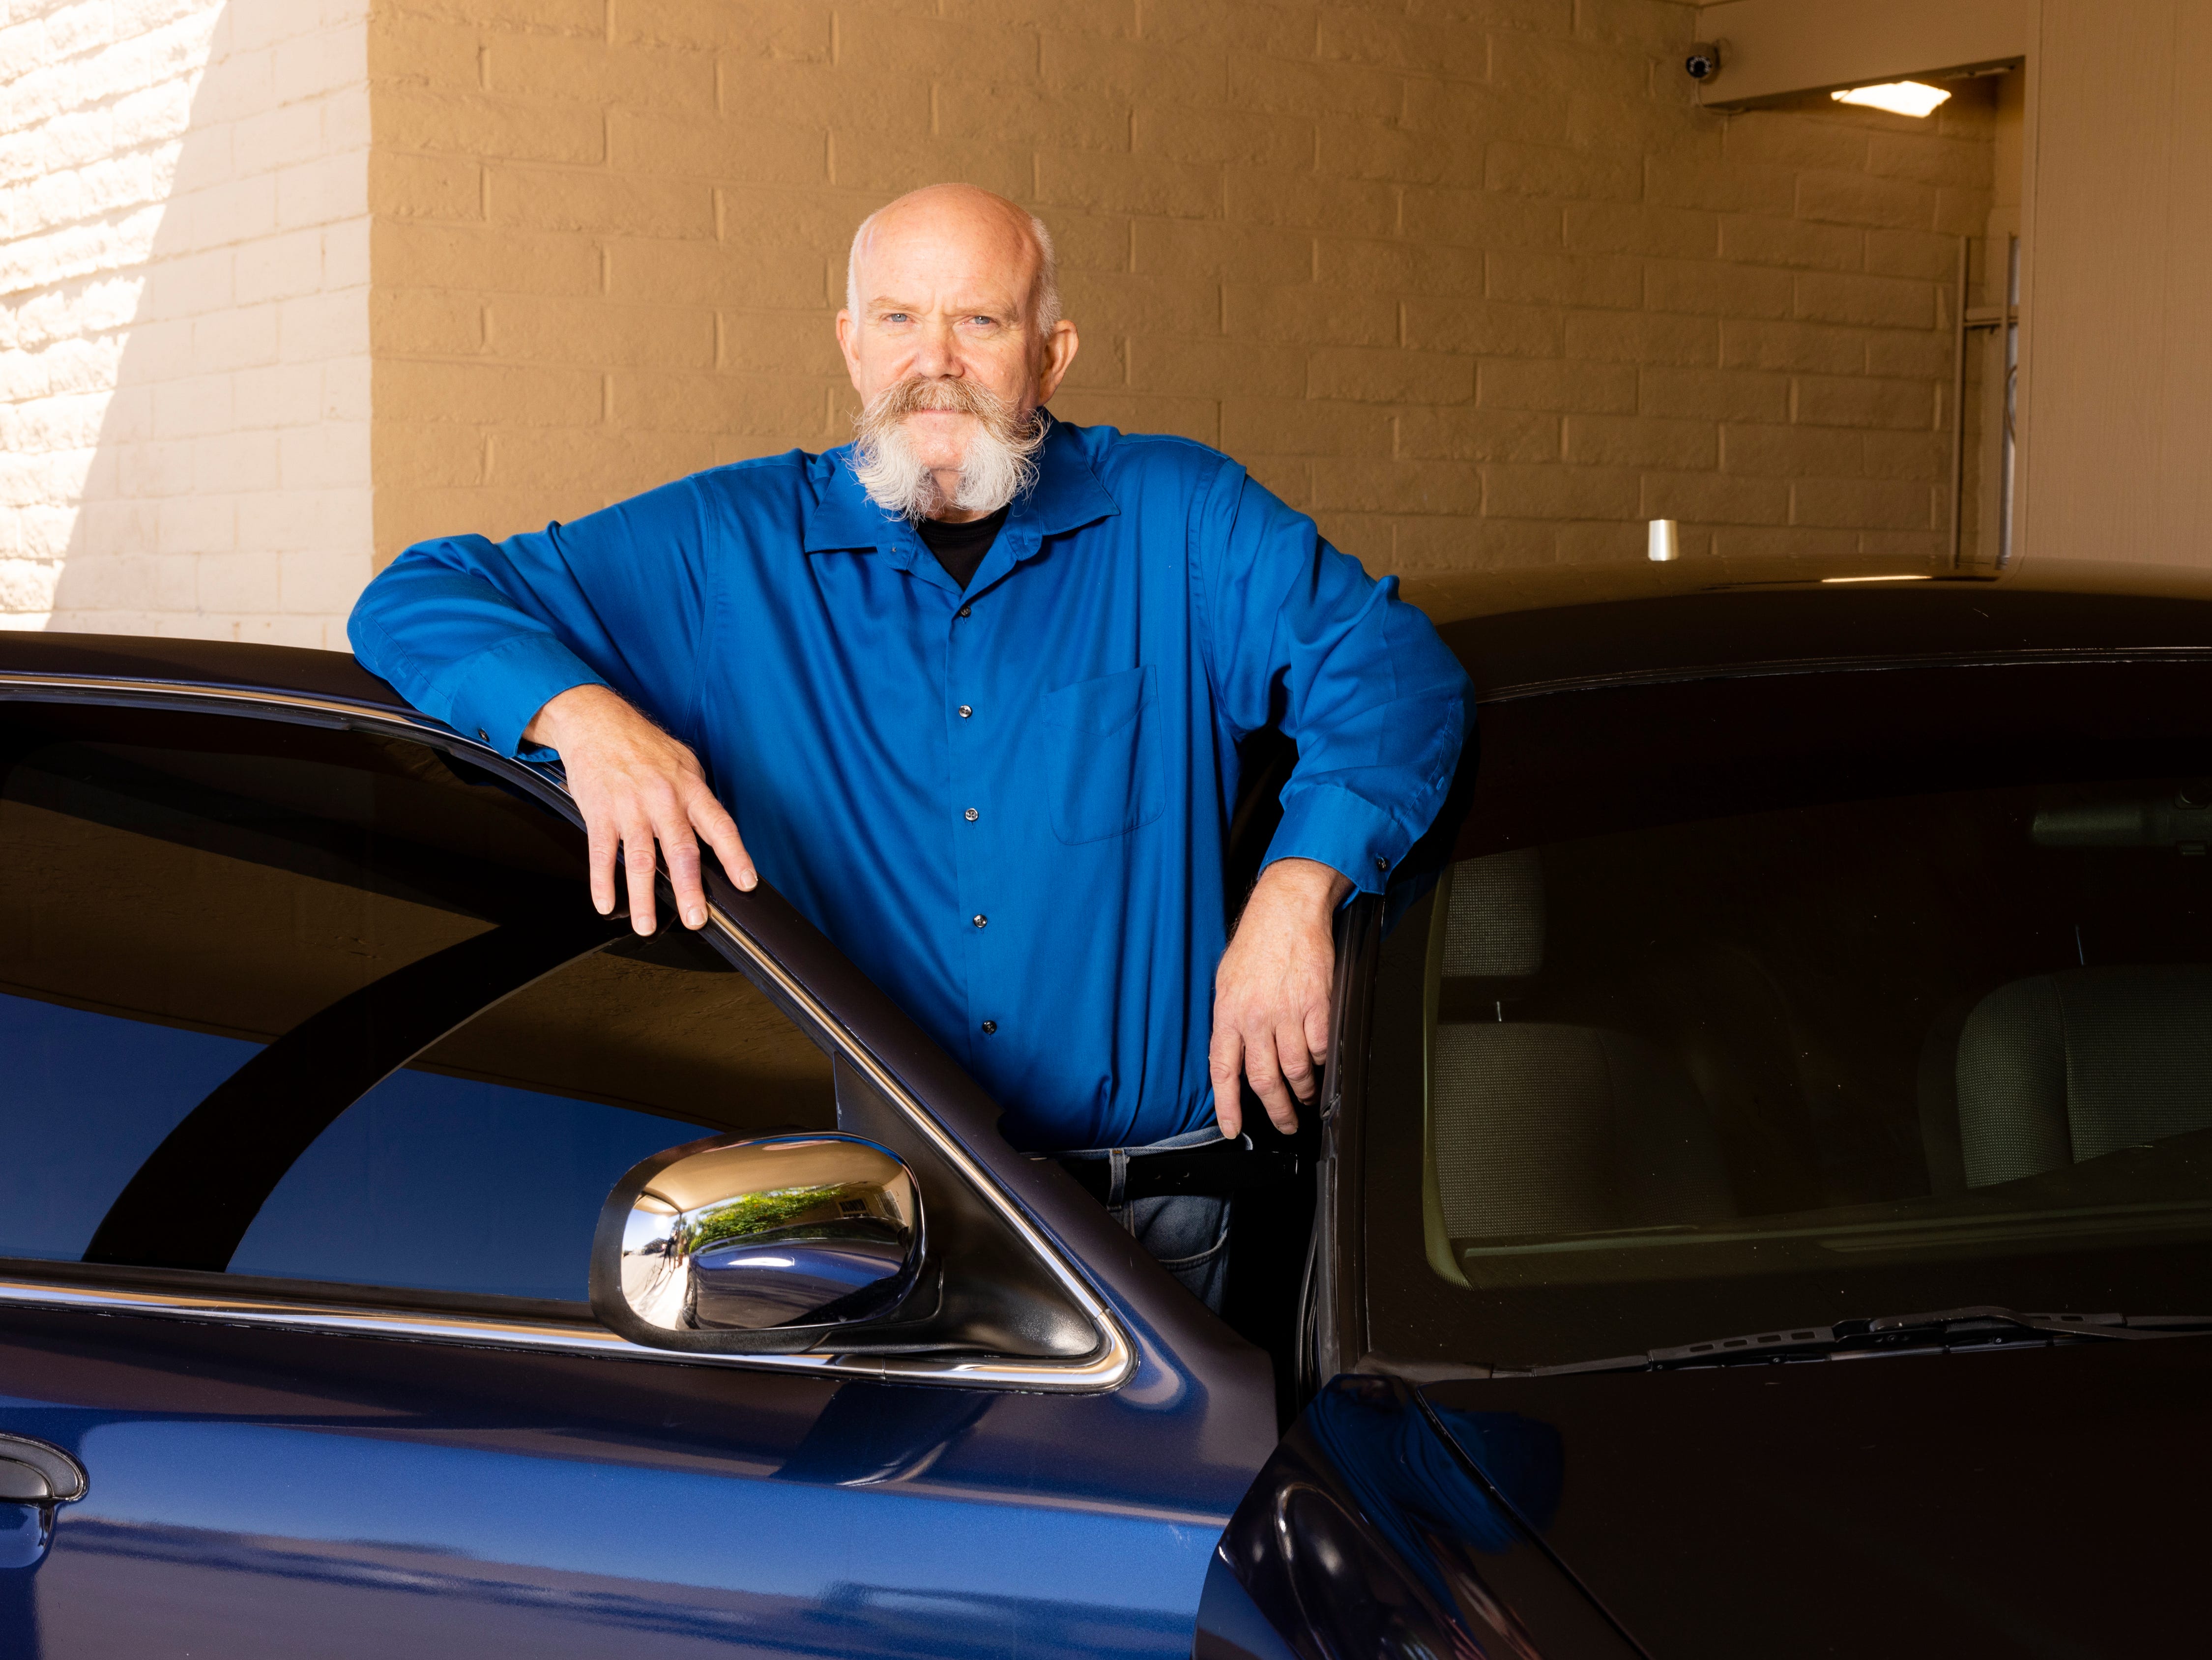 James Hollis of Tucson, Ariz., borrowed $3,050 to get his car's transmission fixed, but his two car title loans will ultimately cost him almost $14,000.